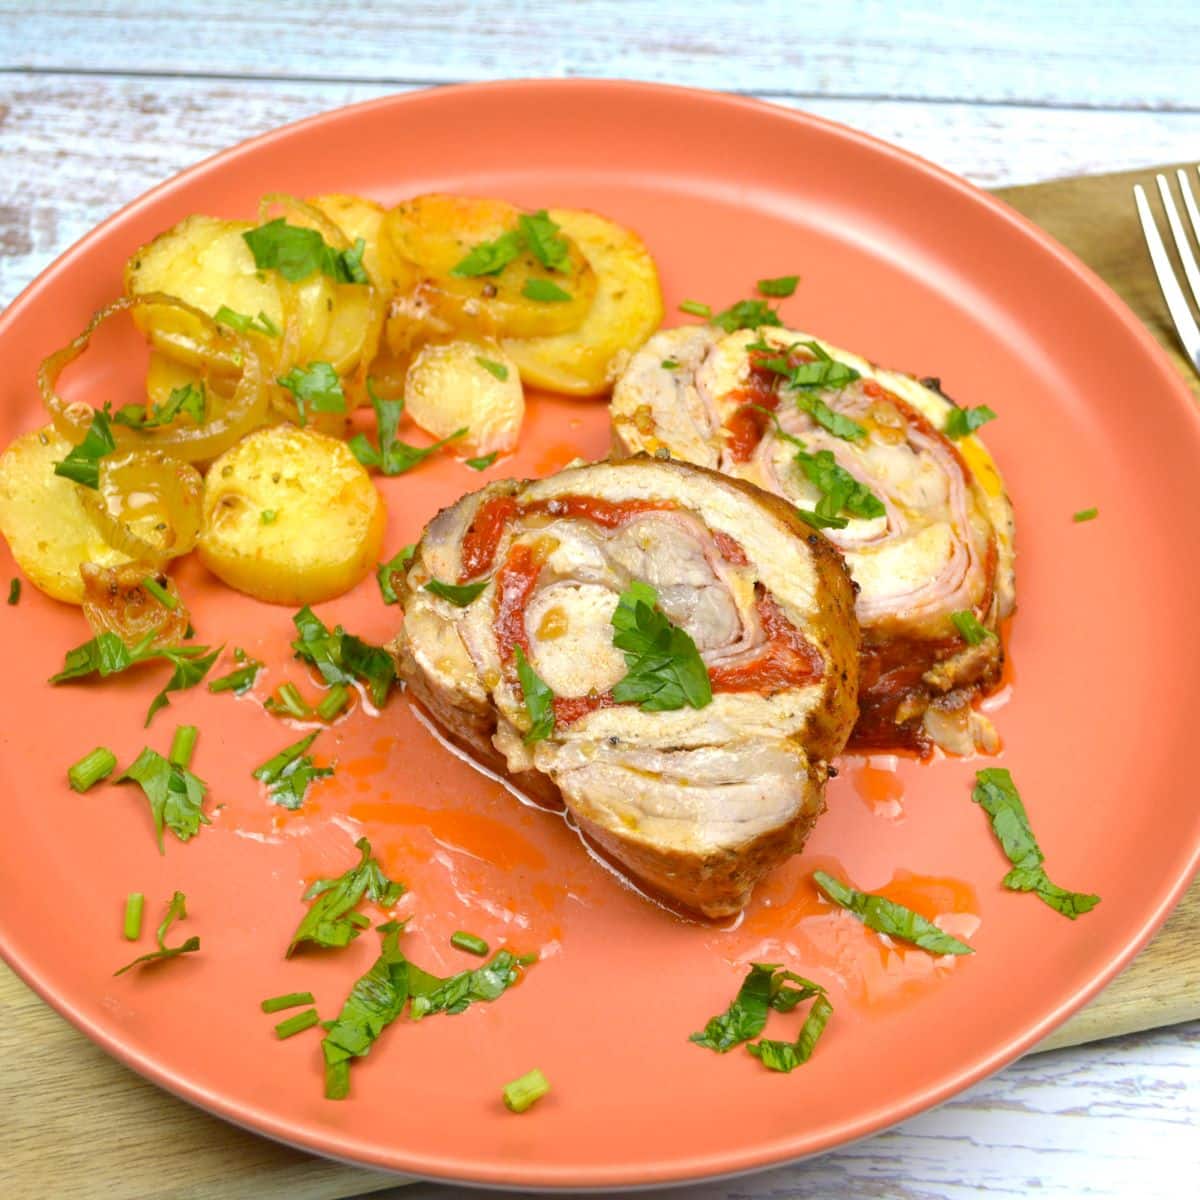 Ham and Cheese Stuffed Pork Loin-Stuffed Pork Loin Slices Served on the Orange Plate With Potatoes